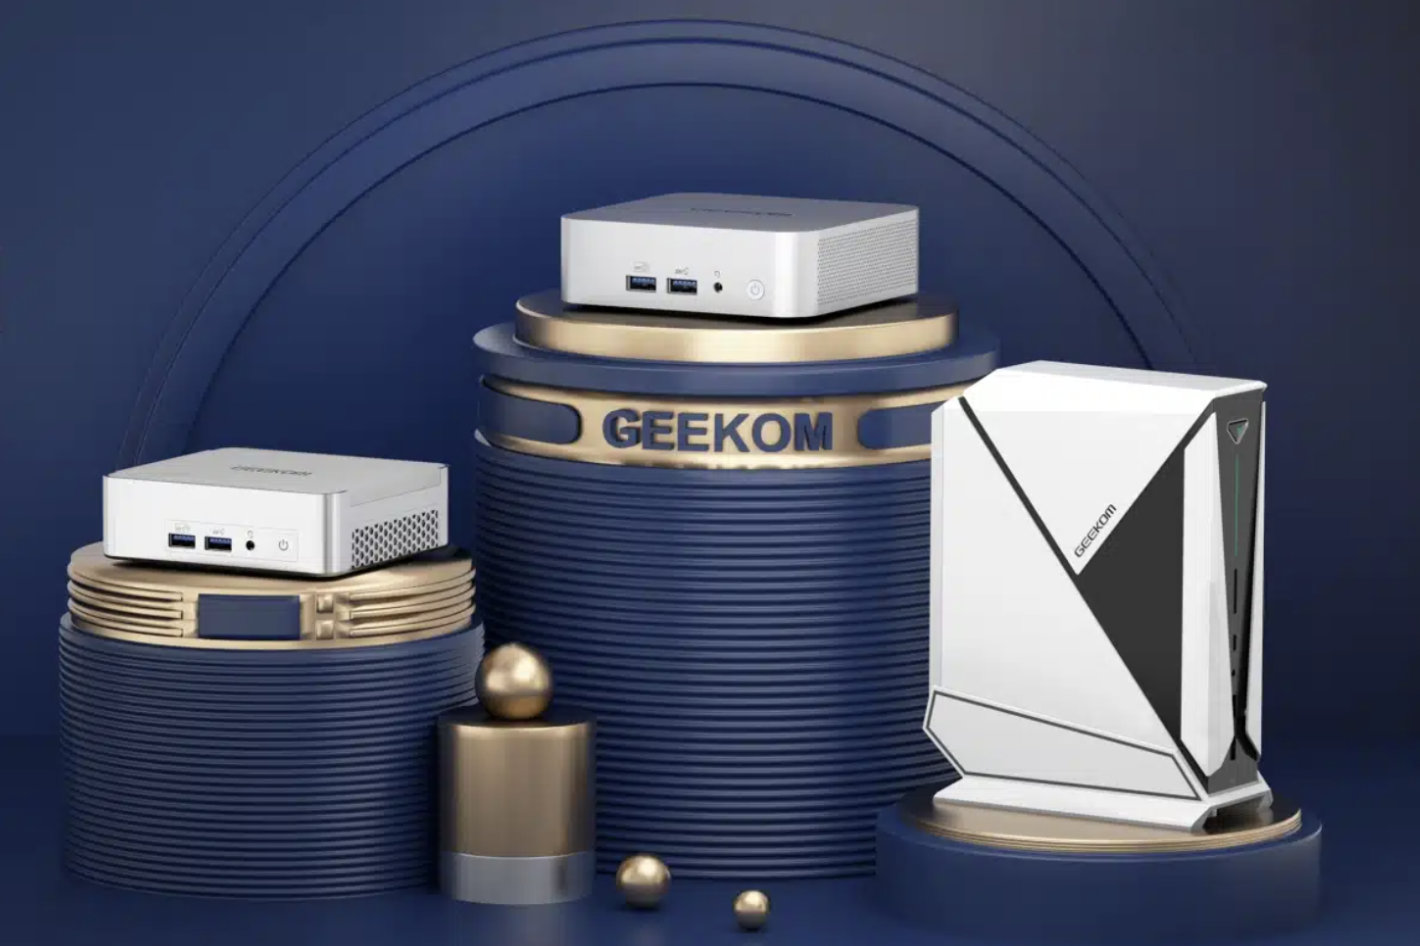 GEEKOM showcases new Mini PCs at CES 2024 by Jose Antunes